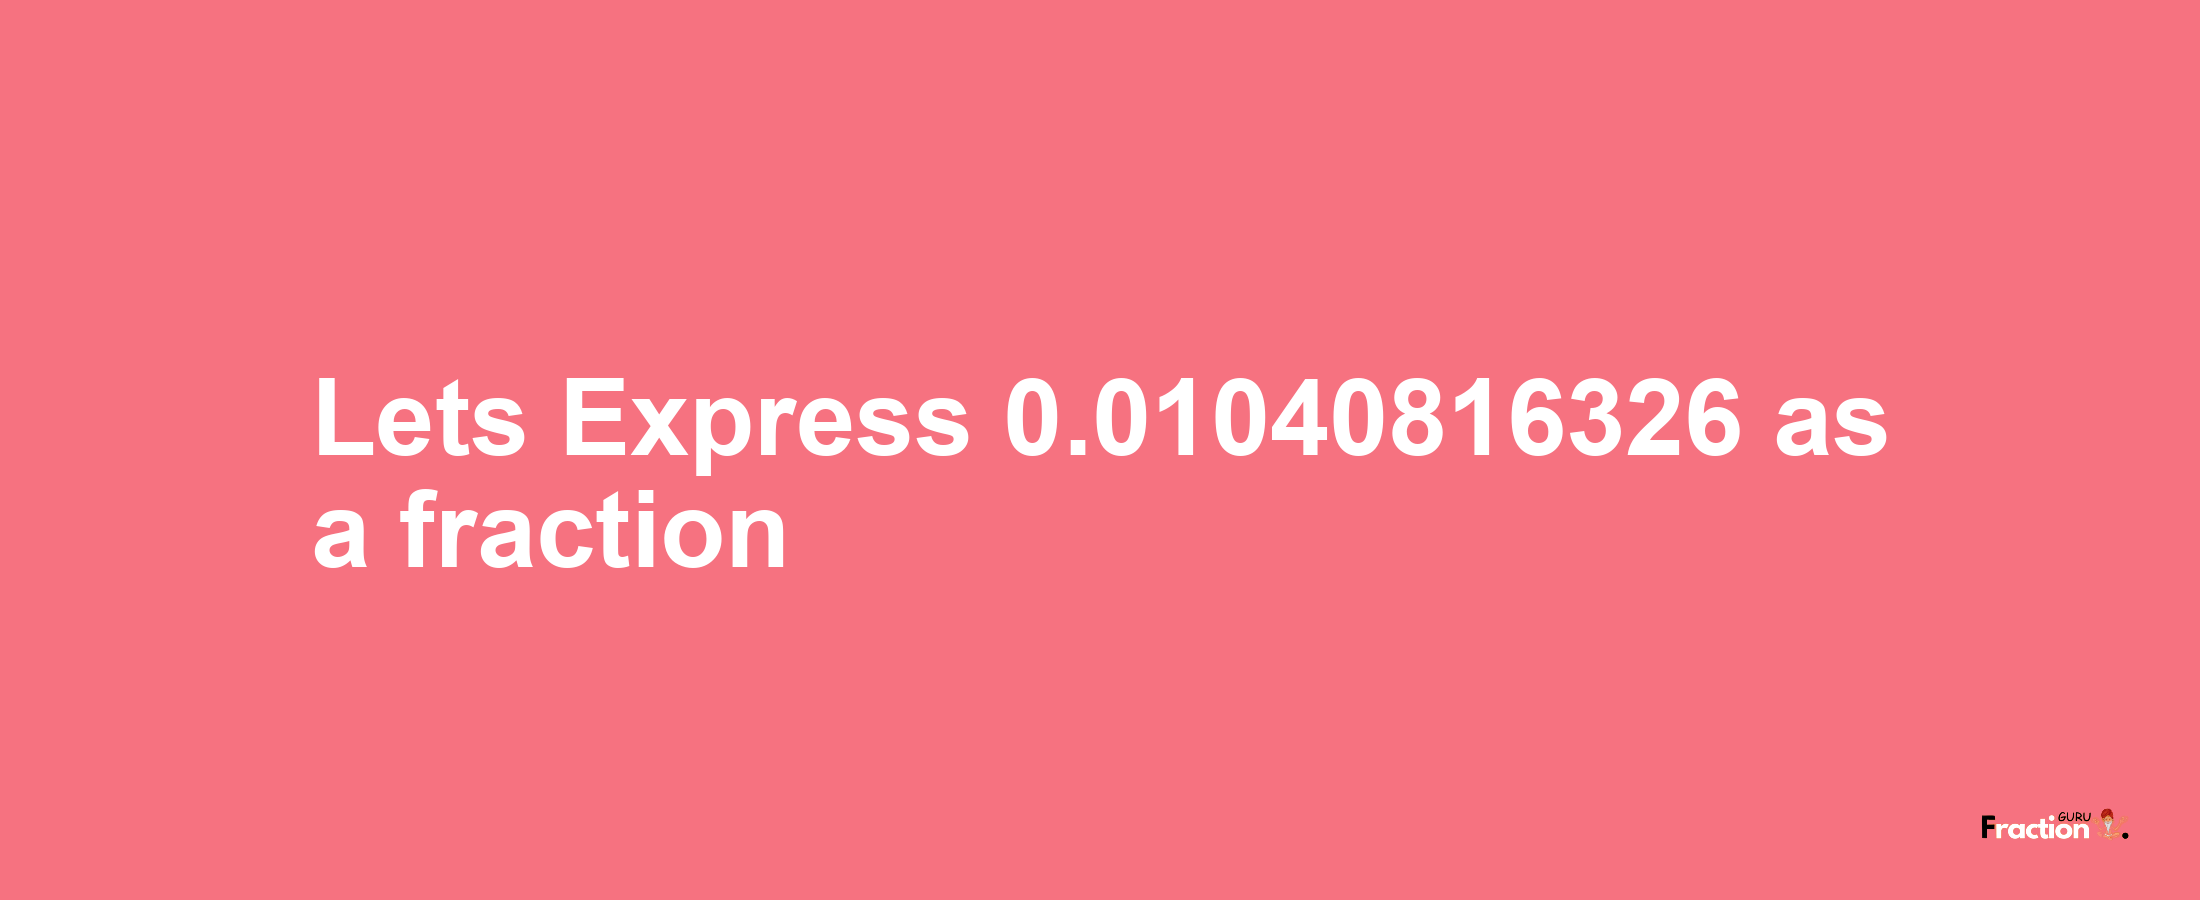 Lets Express 0.01040816326 as afraction